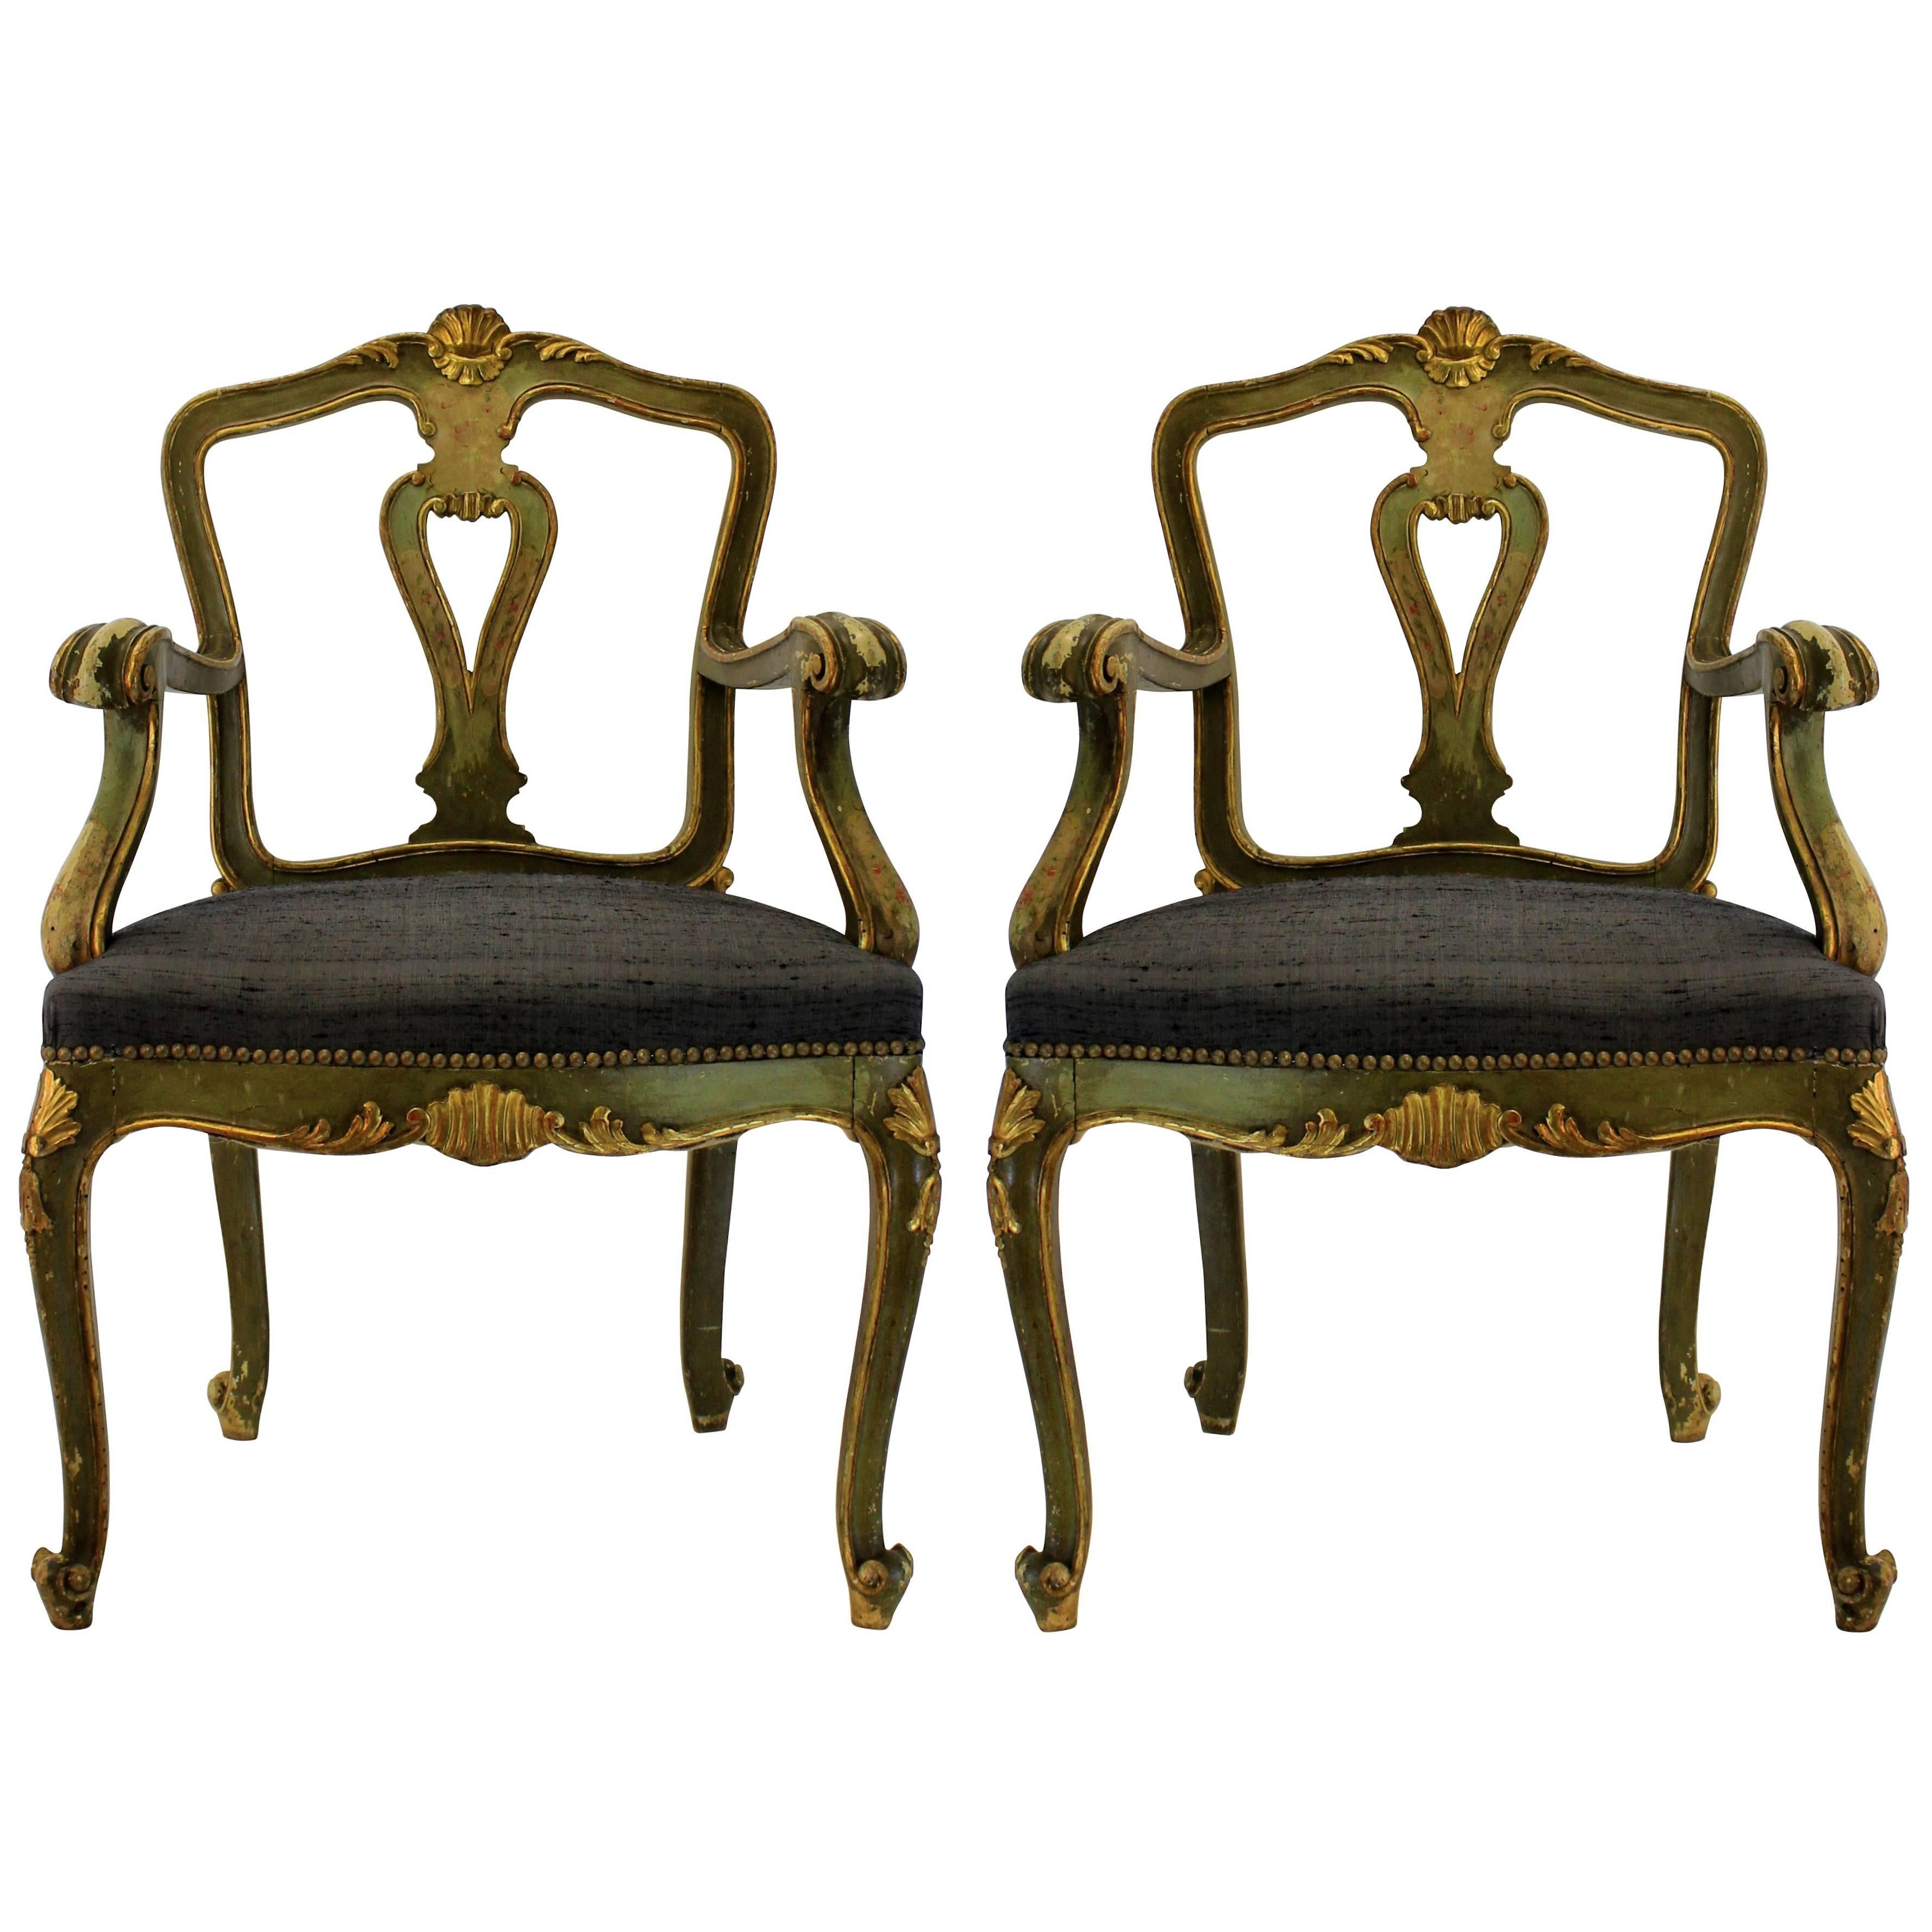 A pair of Northern Italian painted and water gilded armchairs with attractive backs. Newly upholstered in charcoal grey dupion silk.
  